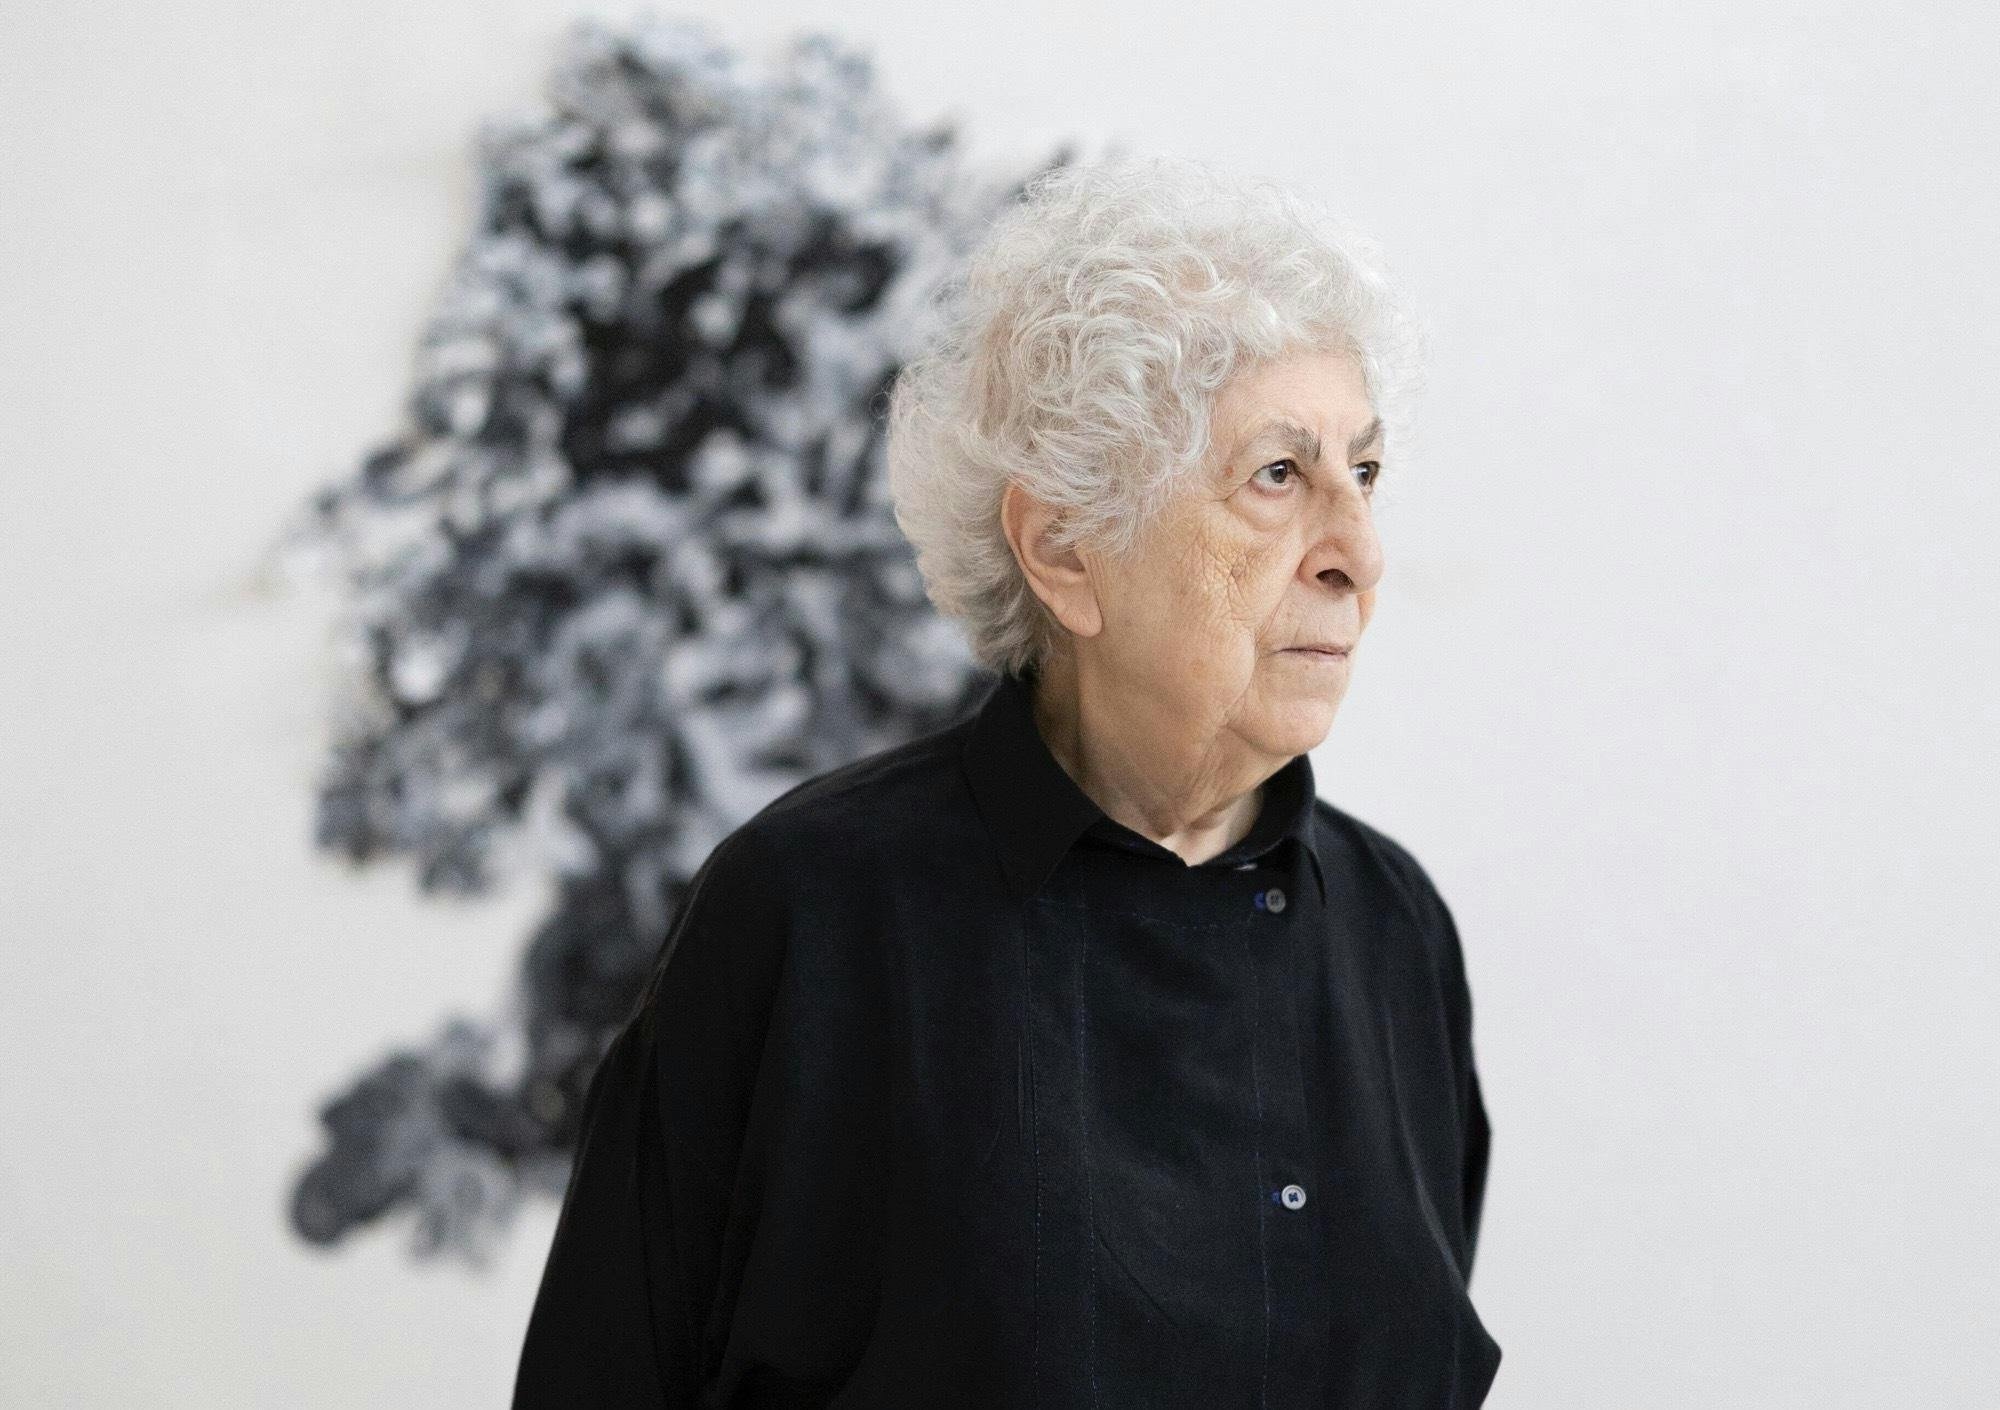 Samia Halaby is is a renowned Palestinian-American artist with works displayed internationally at the Guggenheim Museum in New York, the British Museum in London, Birzeit University in Palestine, the Art Institute of Chicago and many other museums around the world. Courtesy of the MSU Broad Art Museum. 